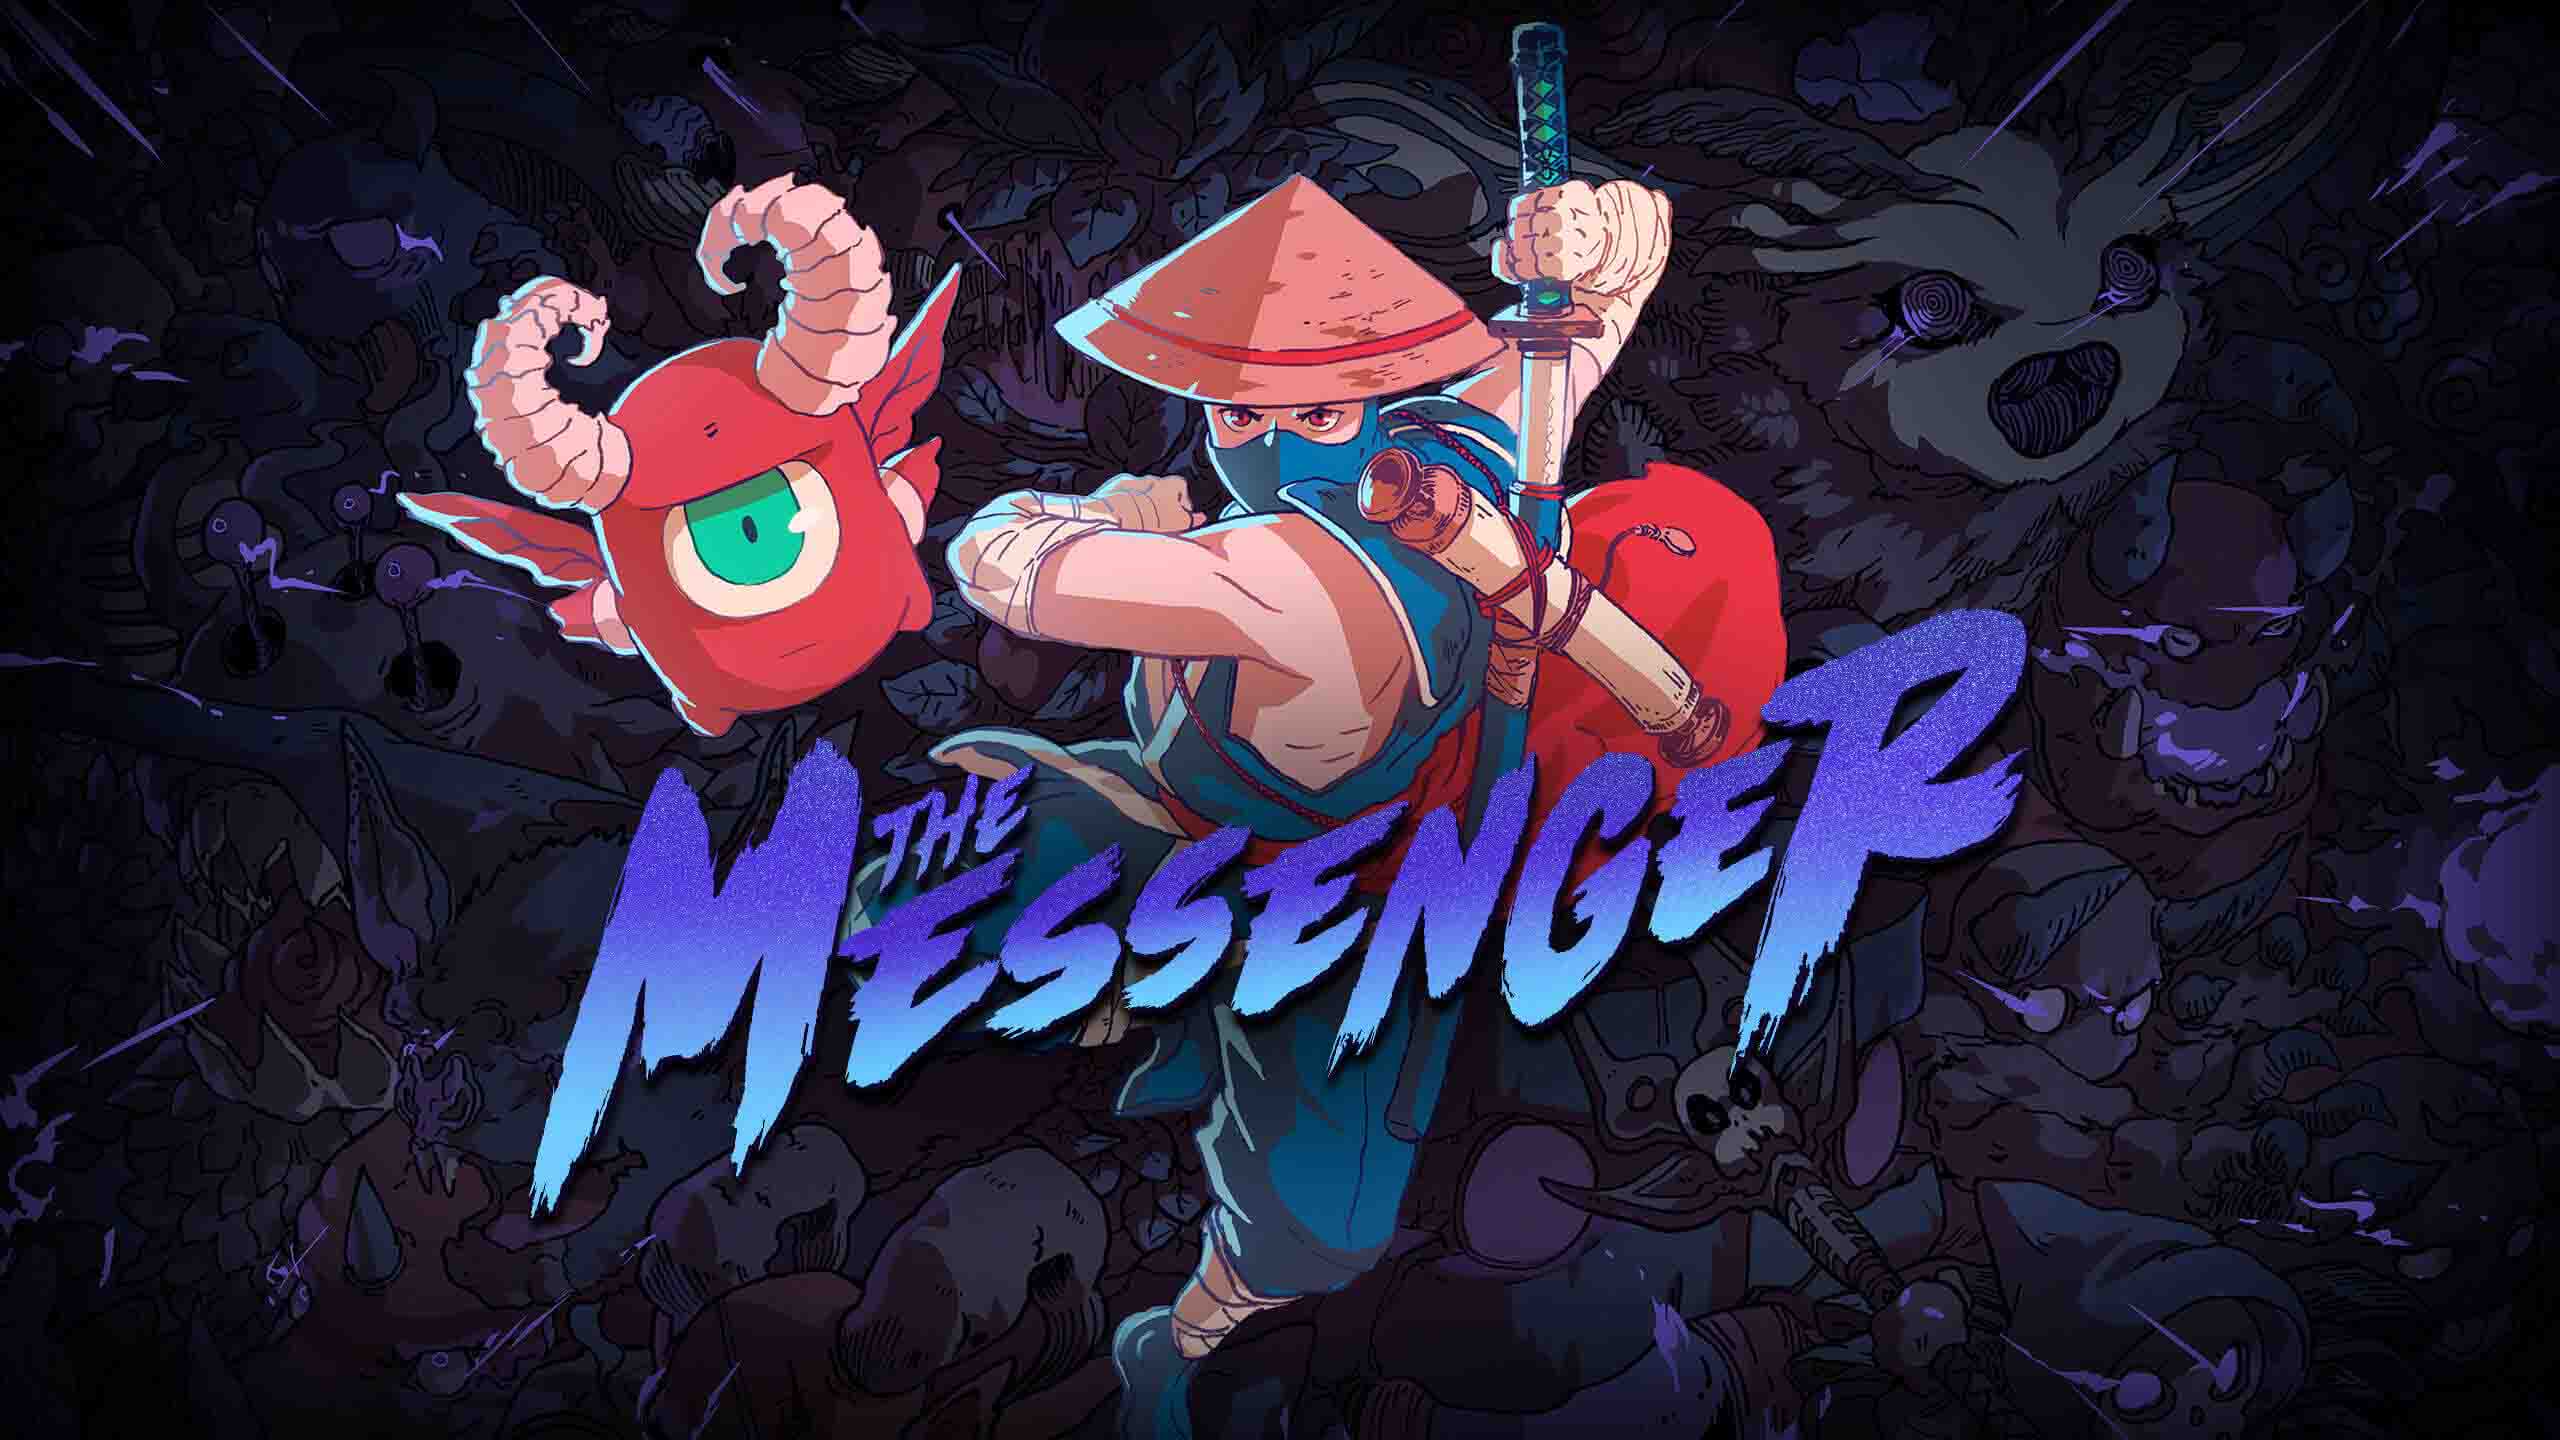 The Messenger System Requirements for PC Games minimum, recommended specifications for Windows, CPU, OS, Processor, RAM Memory, Storage, and GPU.